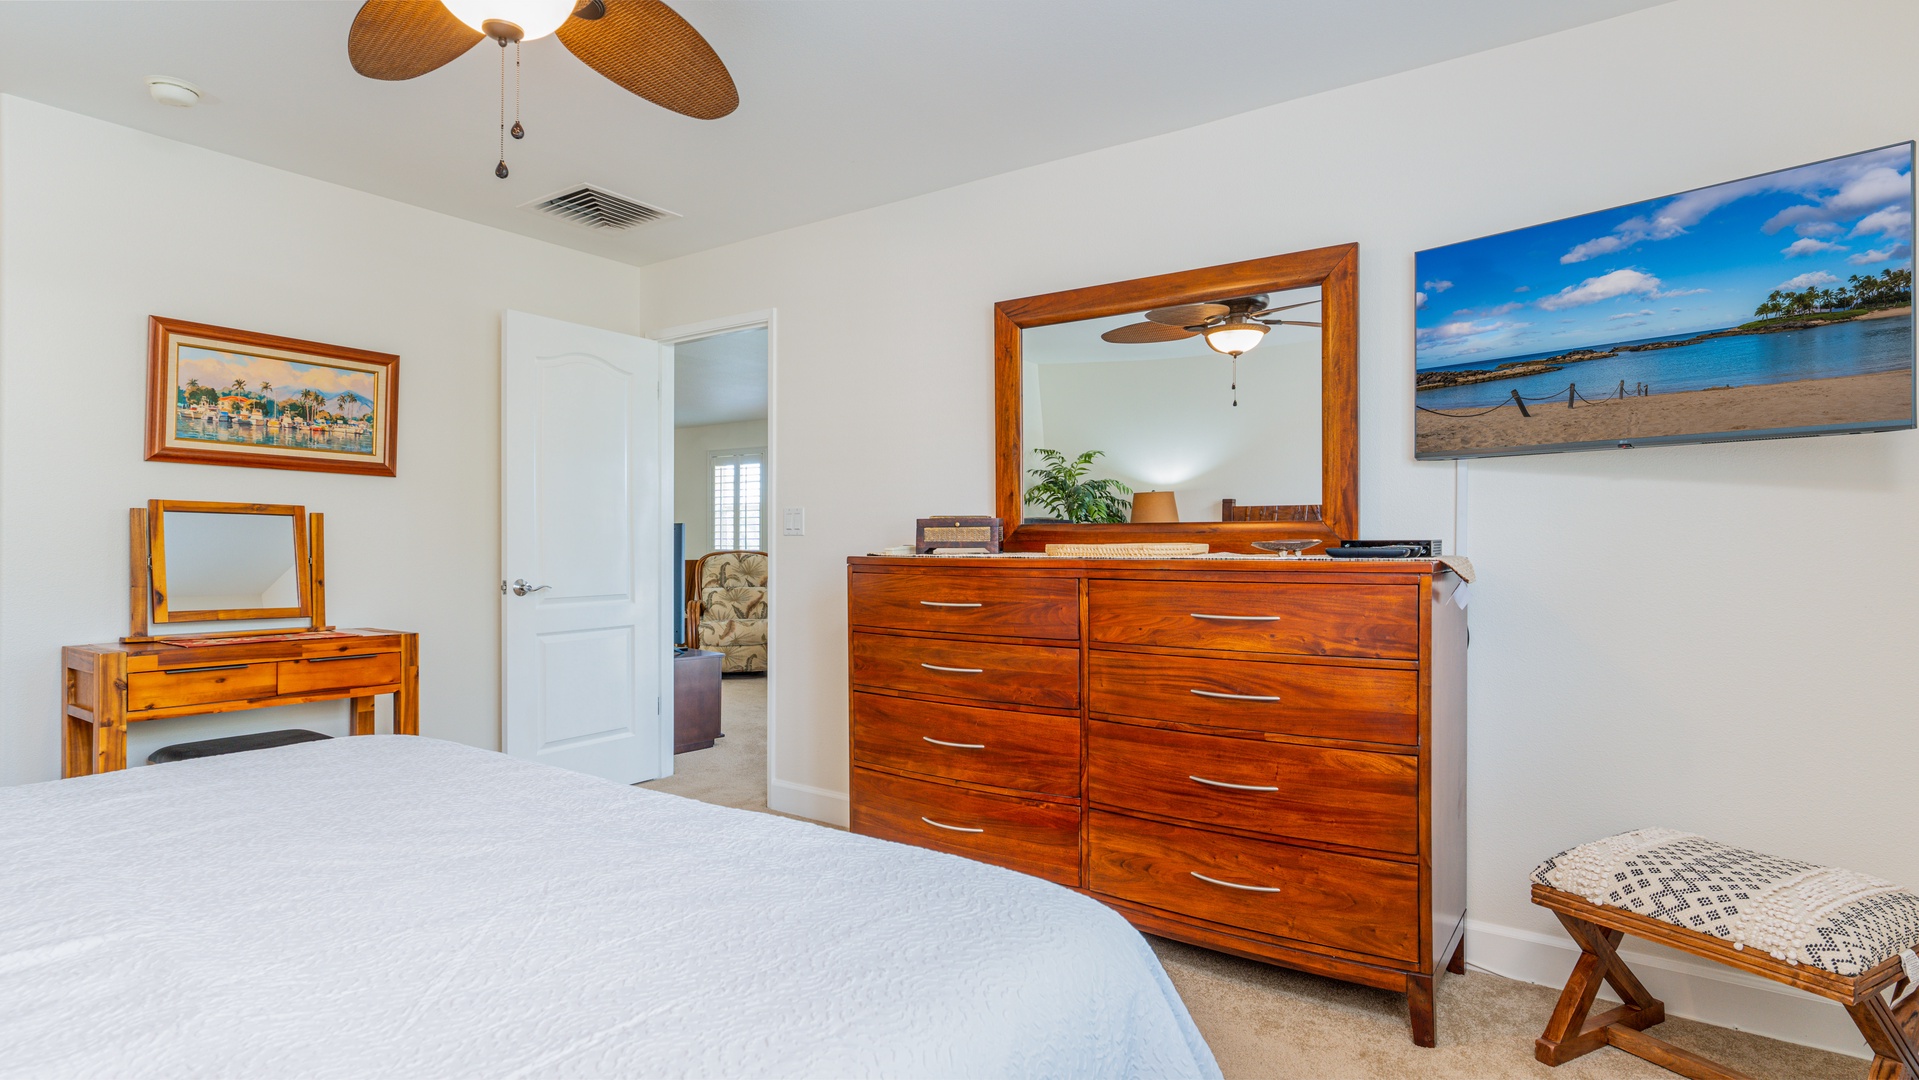 Kapolei Vacation Rentals, Ko Olina Kai 1057B - The primary guest bedroom with soft linens and natural lighting.